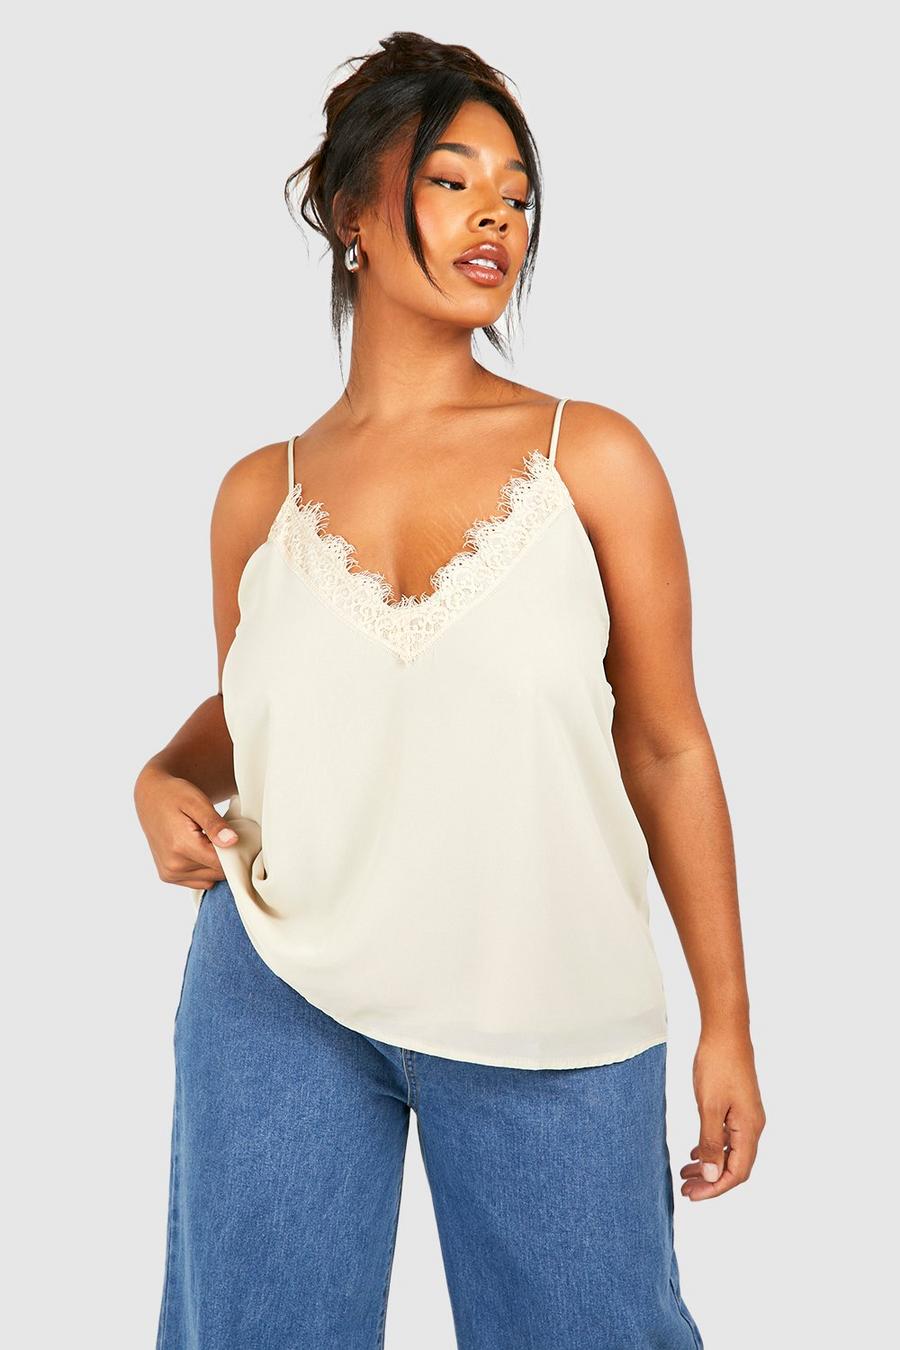 EHQJNJ Camisole Tops for Women Plus Size with Bra Women's Summer